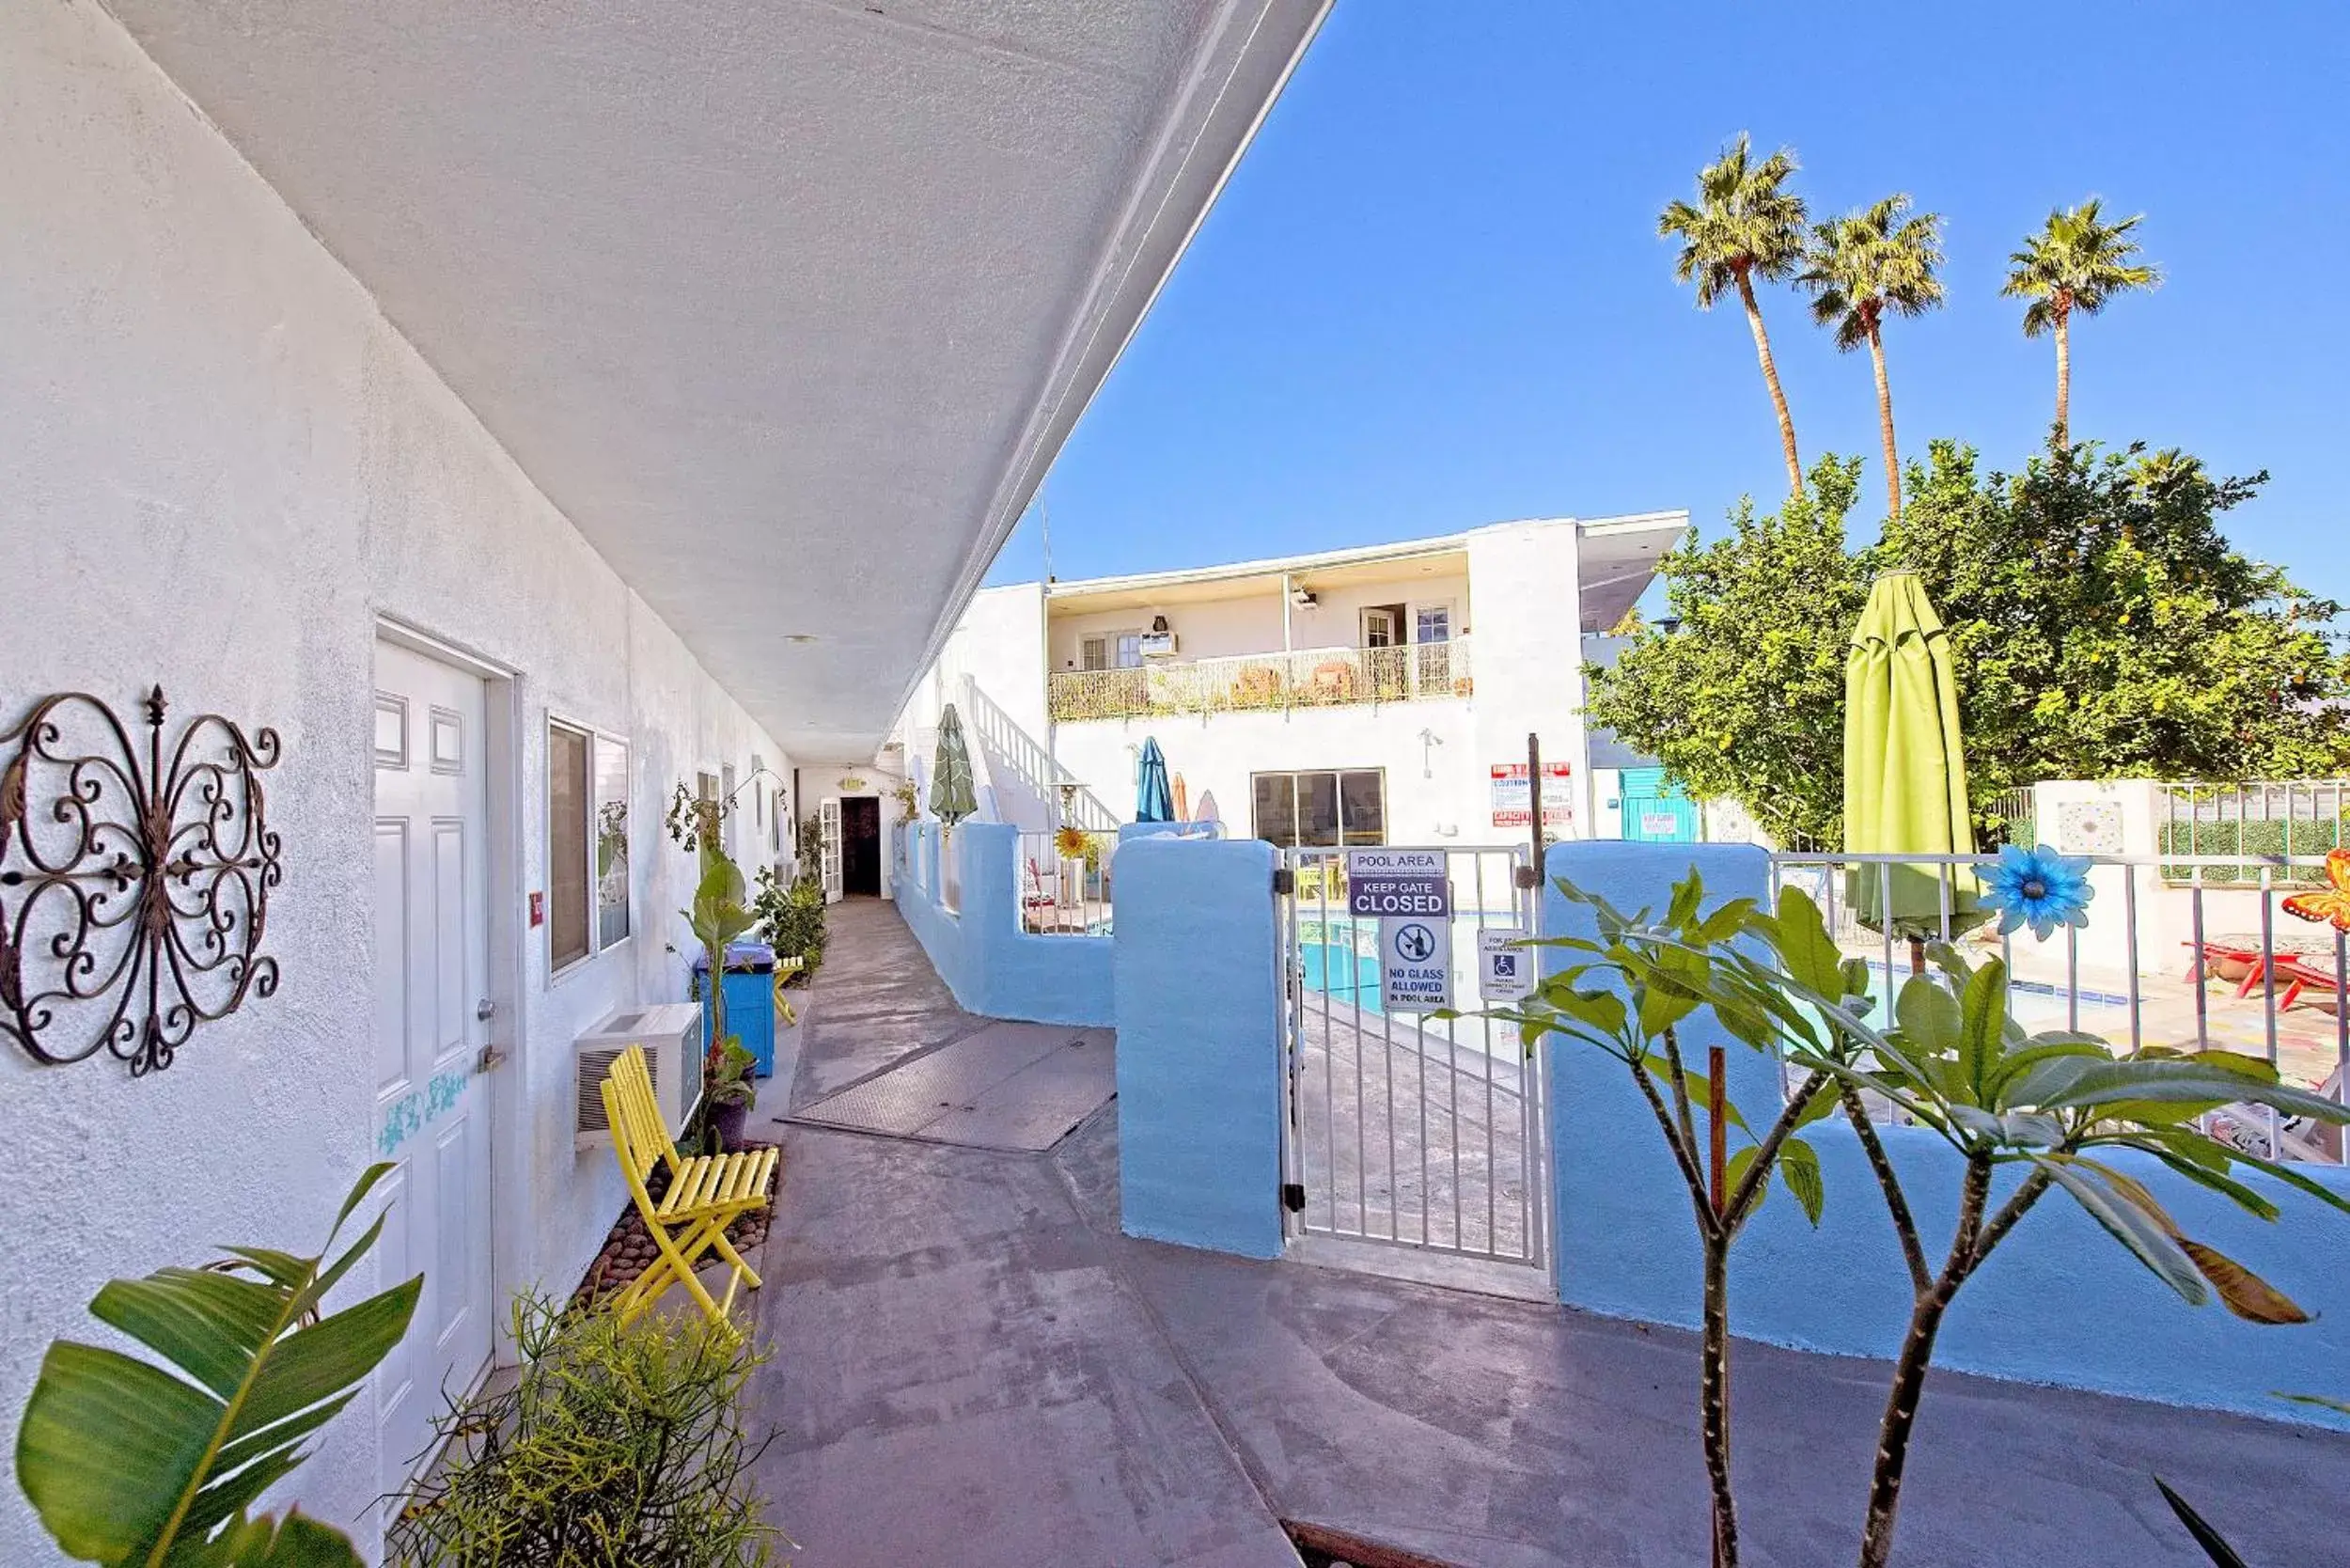 Property building in Inn at Palm Springs